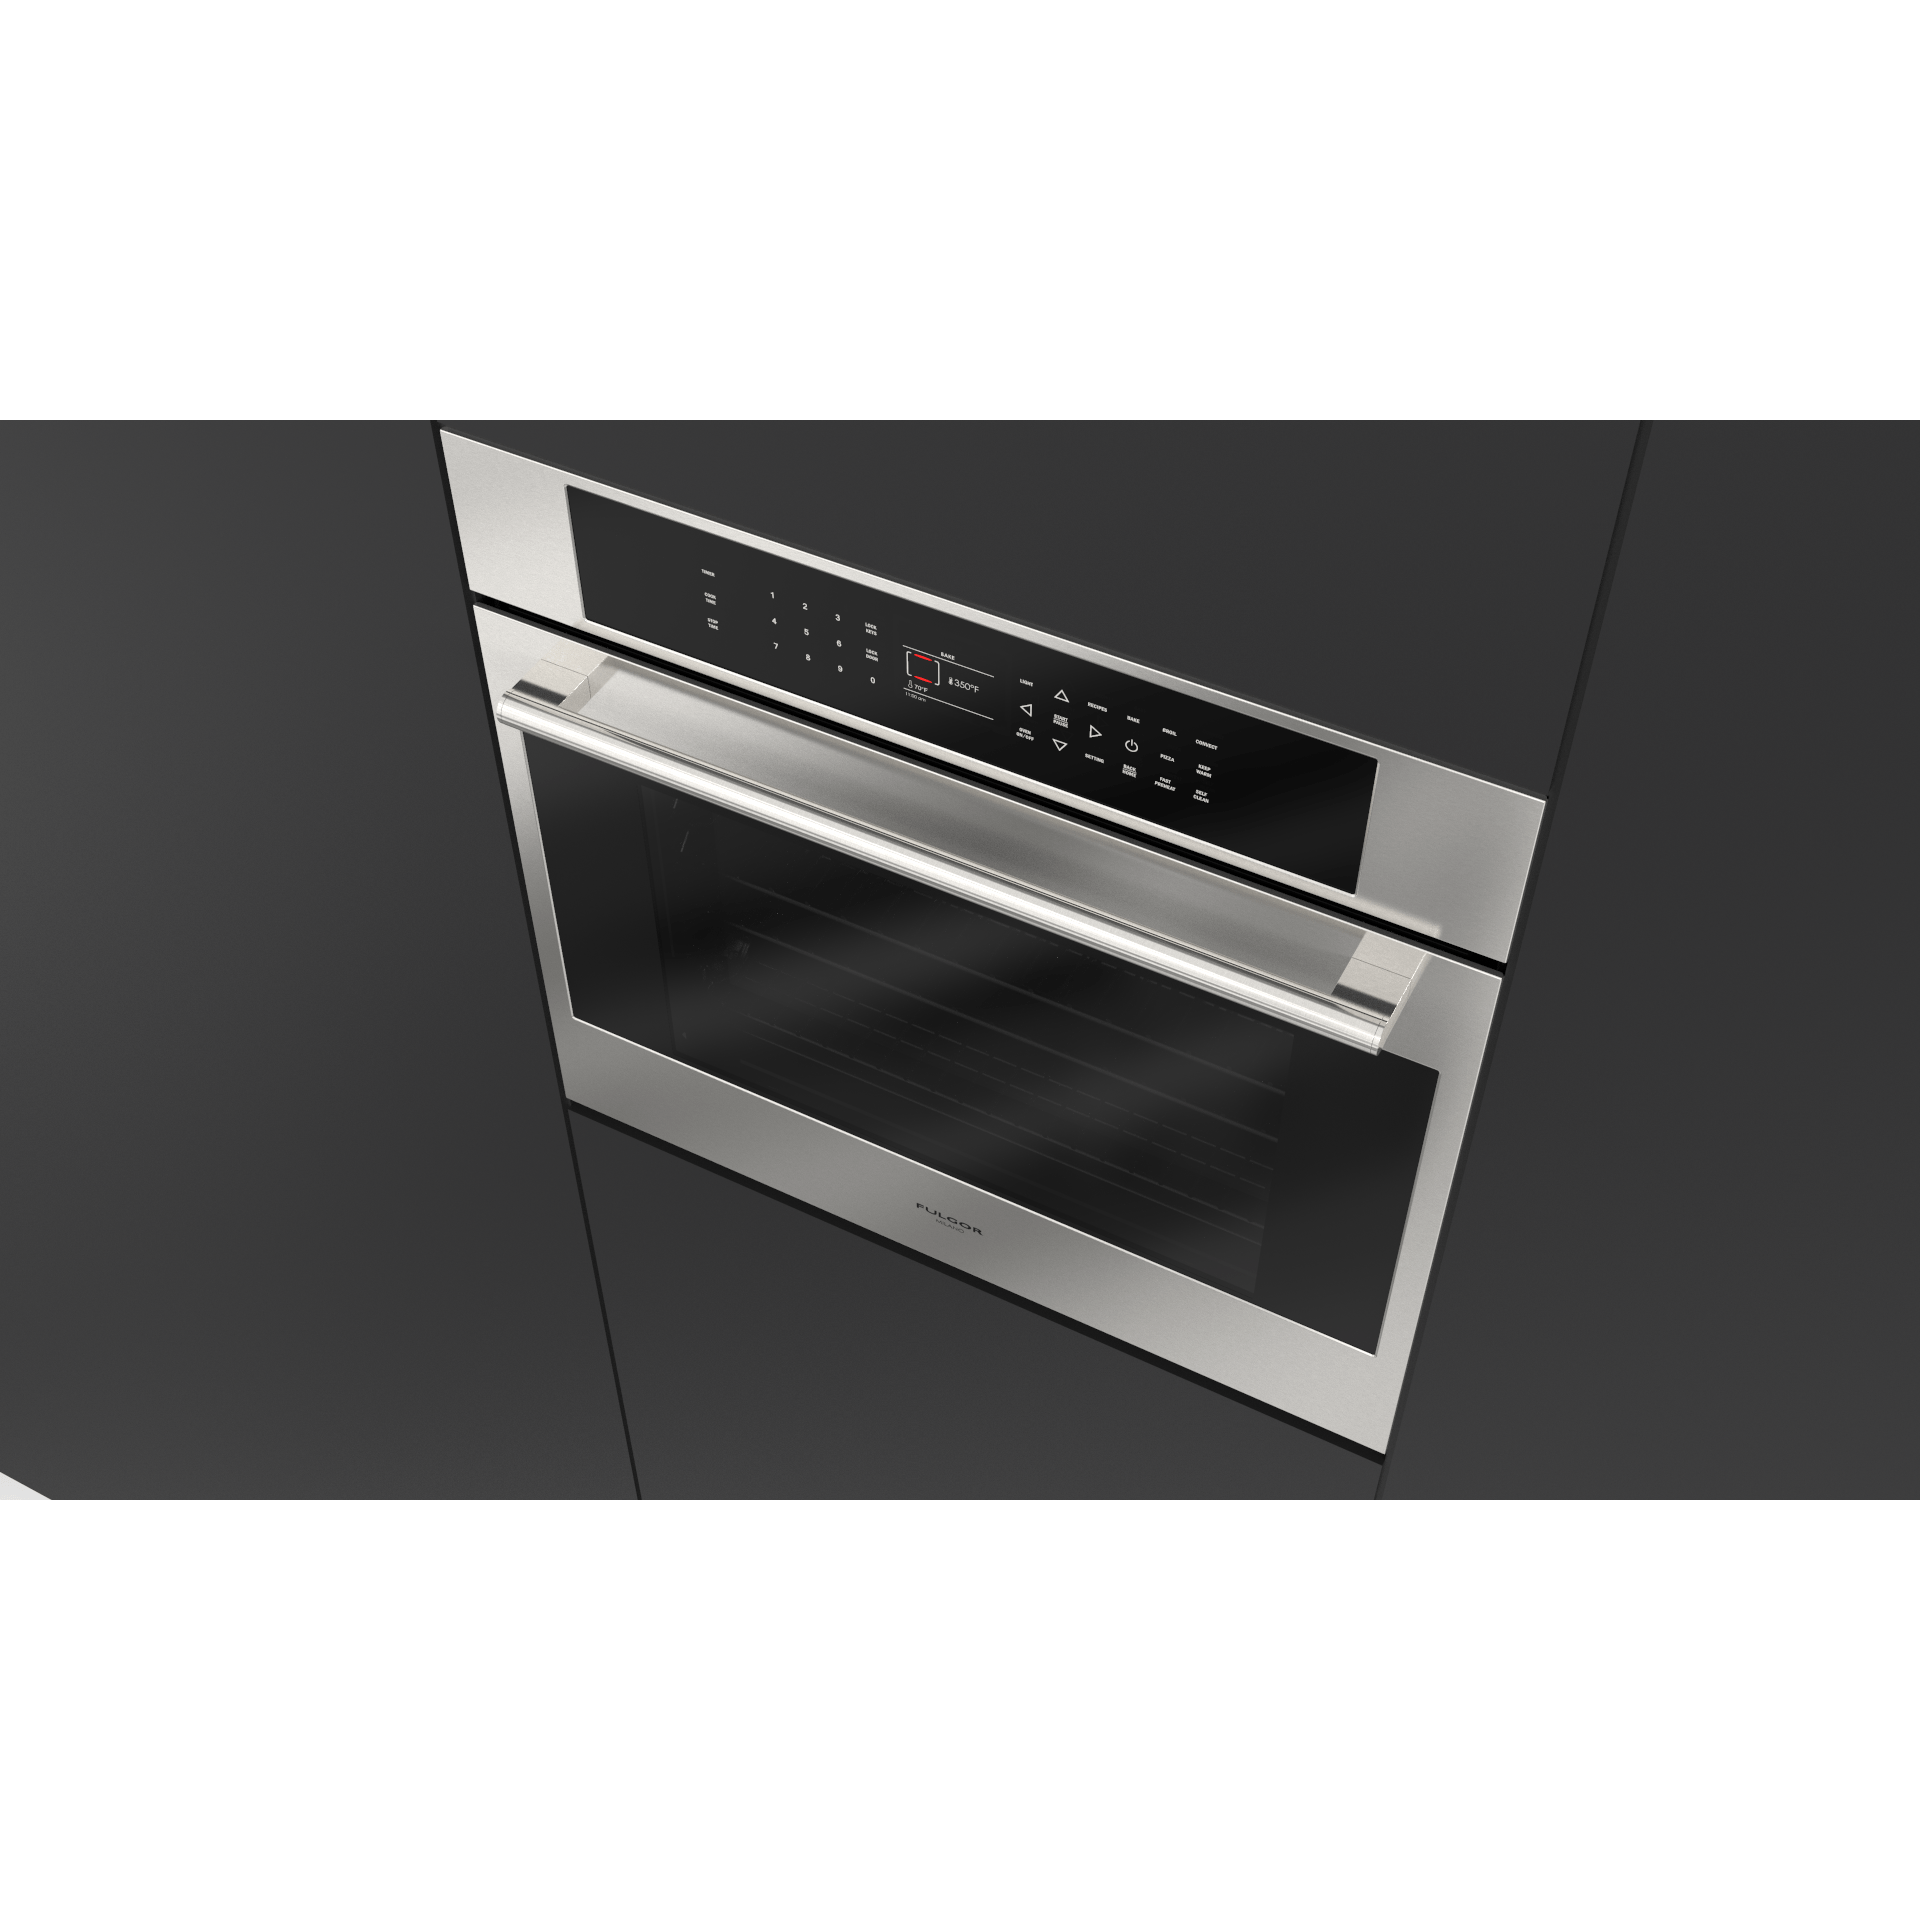 Fulgor Milano 30" Single Electric Wall Oven with 4.4 cu. ft. Gross Capacity - F7SP301 Wall Oven F7SP30S1 Luxury Appliances Direct